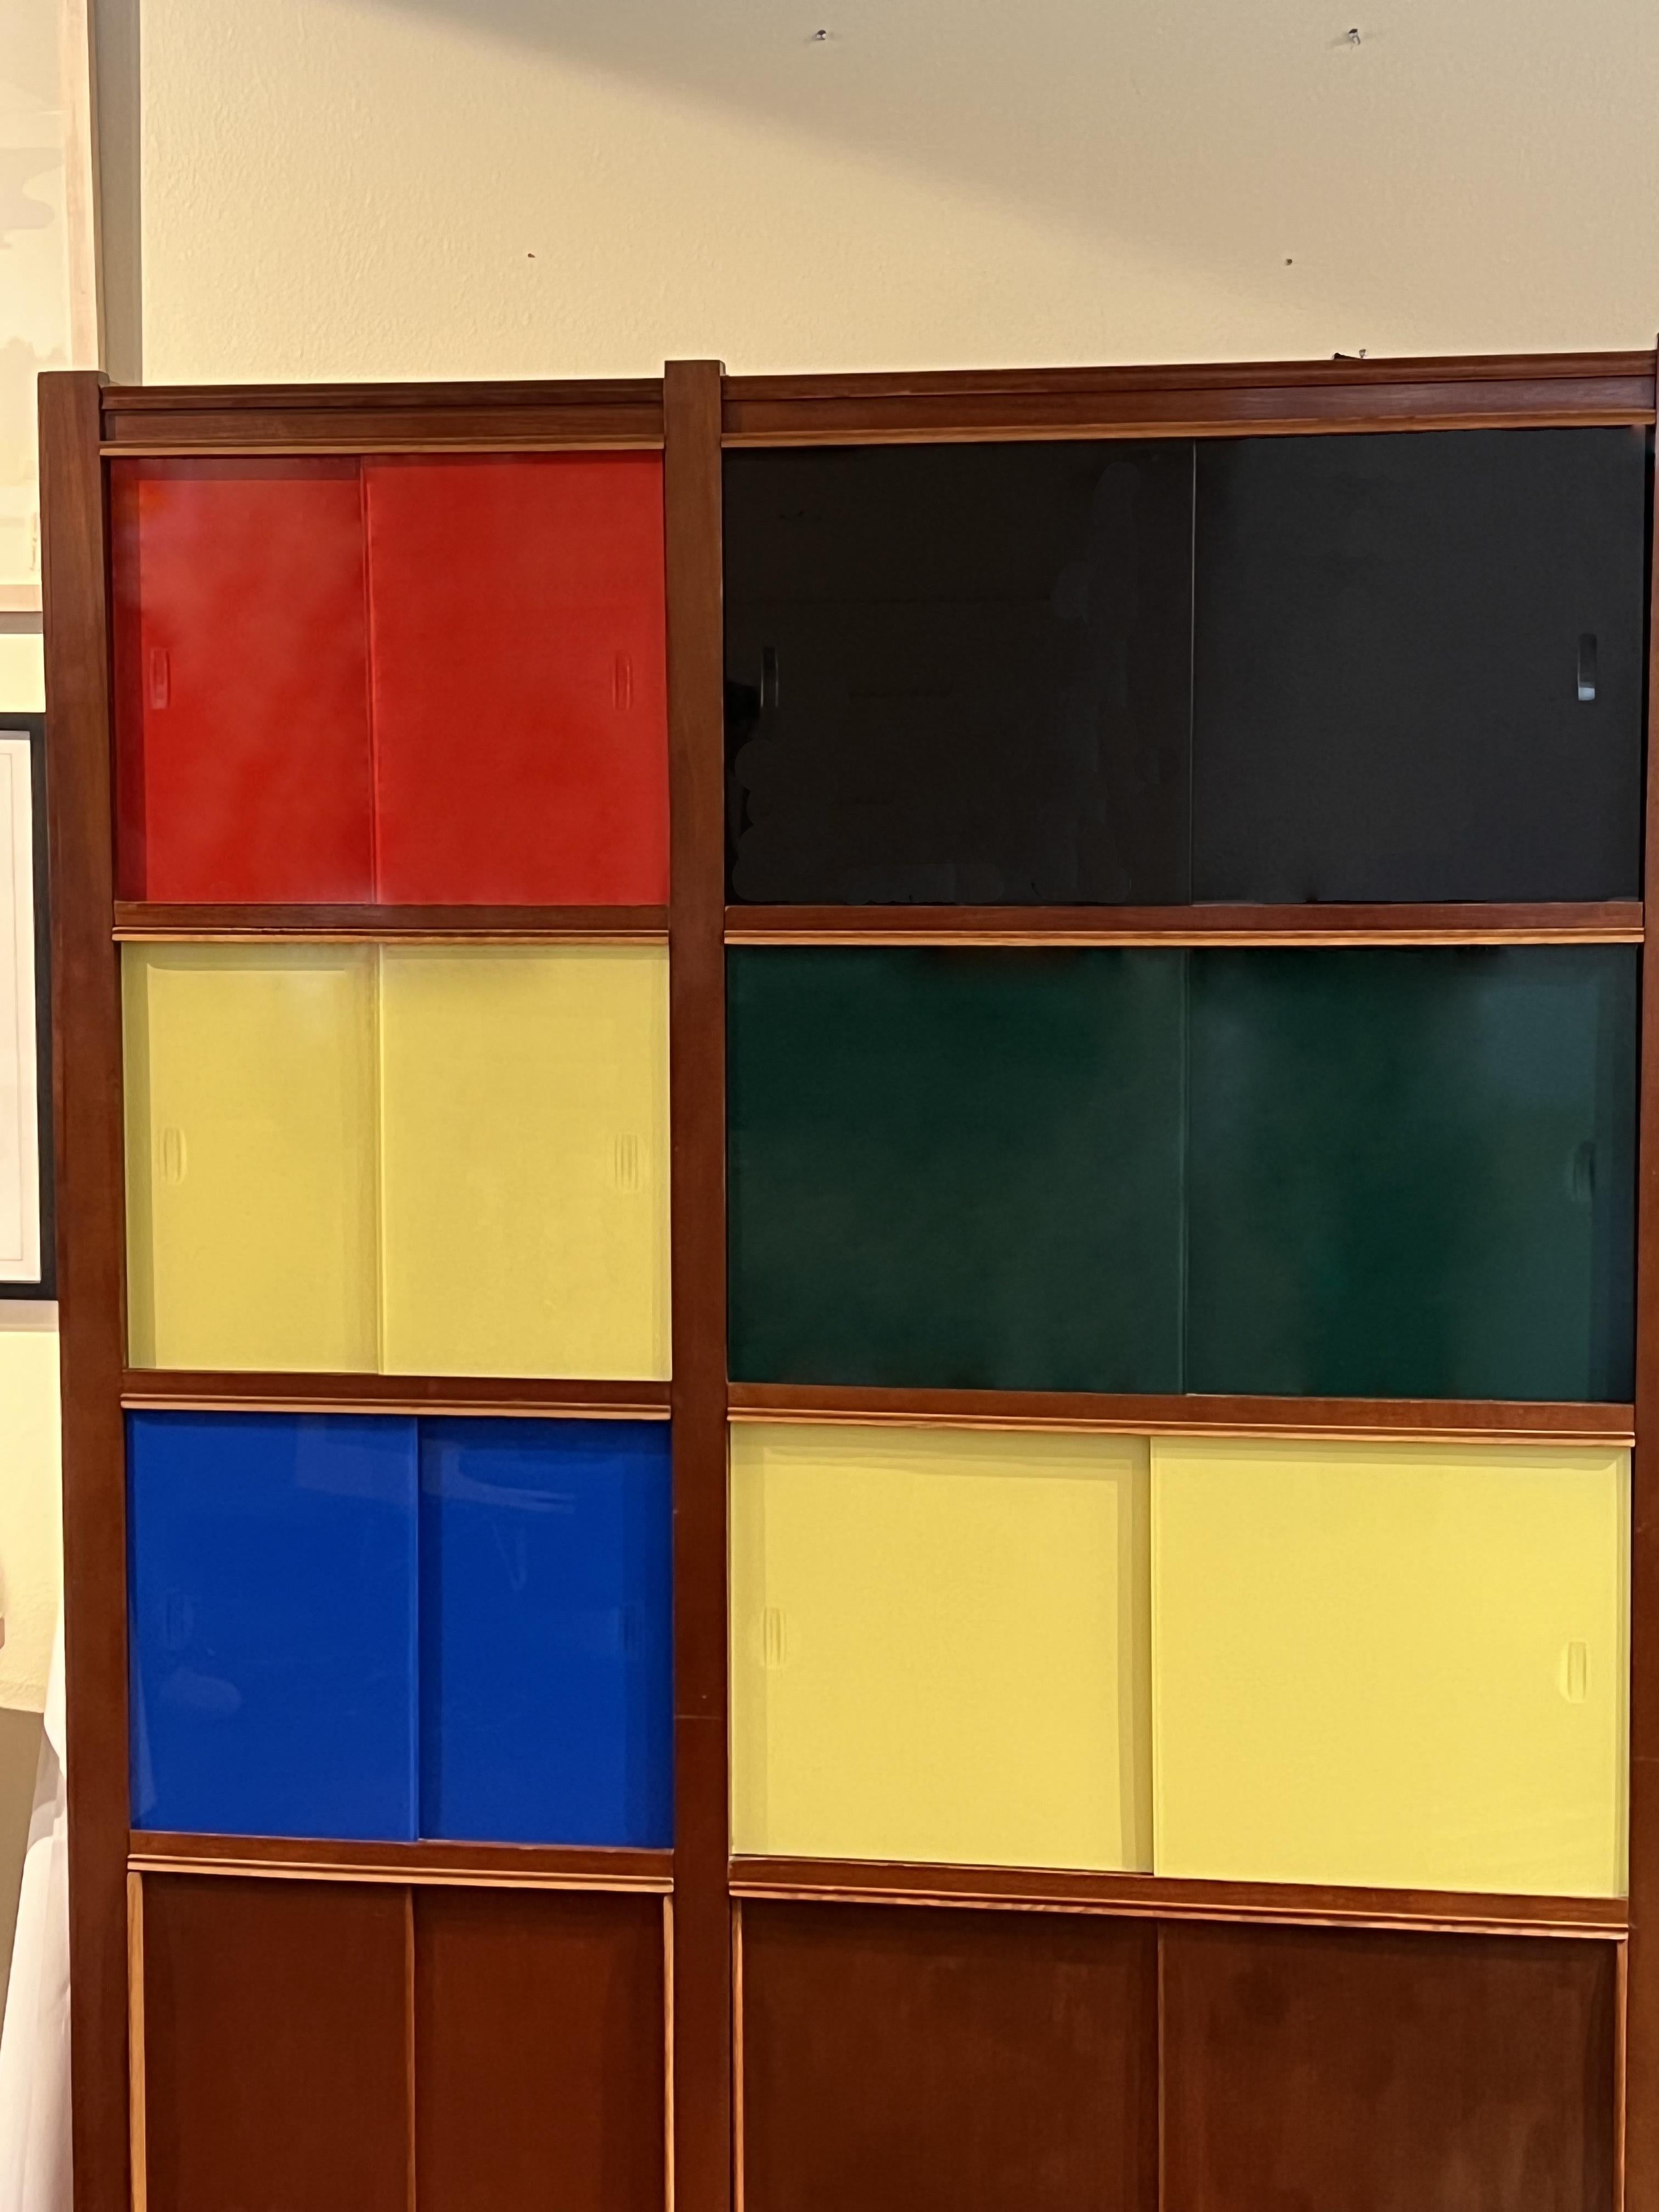 Outstanding 1950s mahogany bookcase featuring 12 cubicle parts. The sliding doors on the bottom are in mahogany whereas the other ones are in red, yellow, blue, black, and green glass reminding us Charlotte Perriand and Jean Prouve bookshelves.